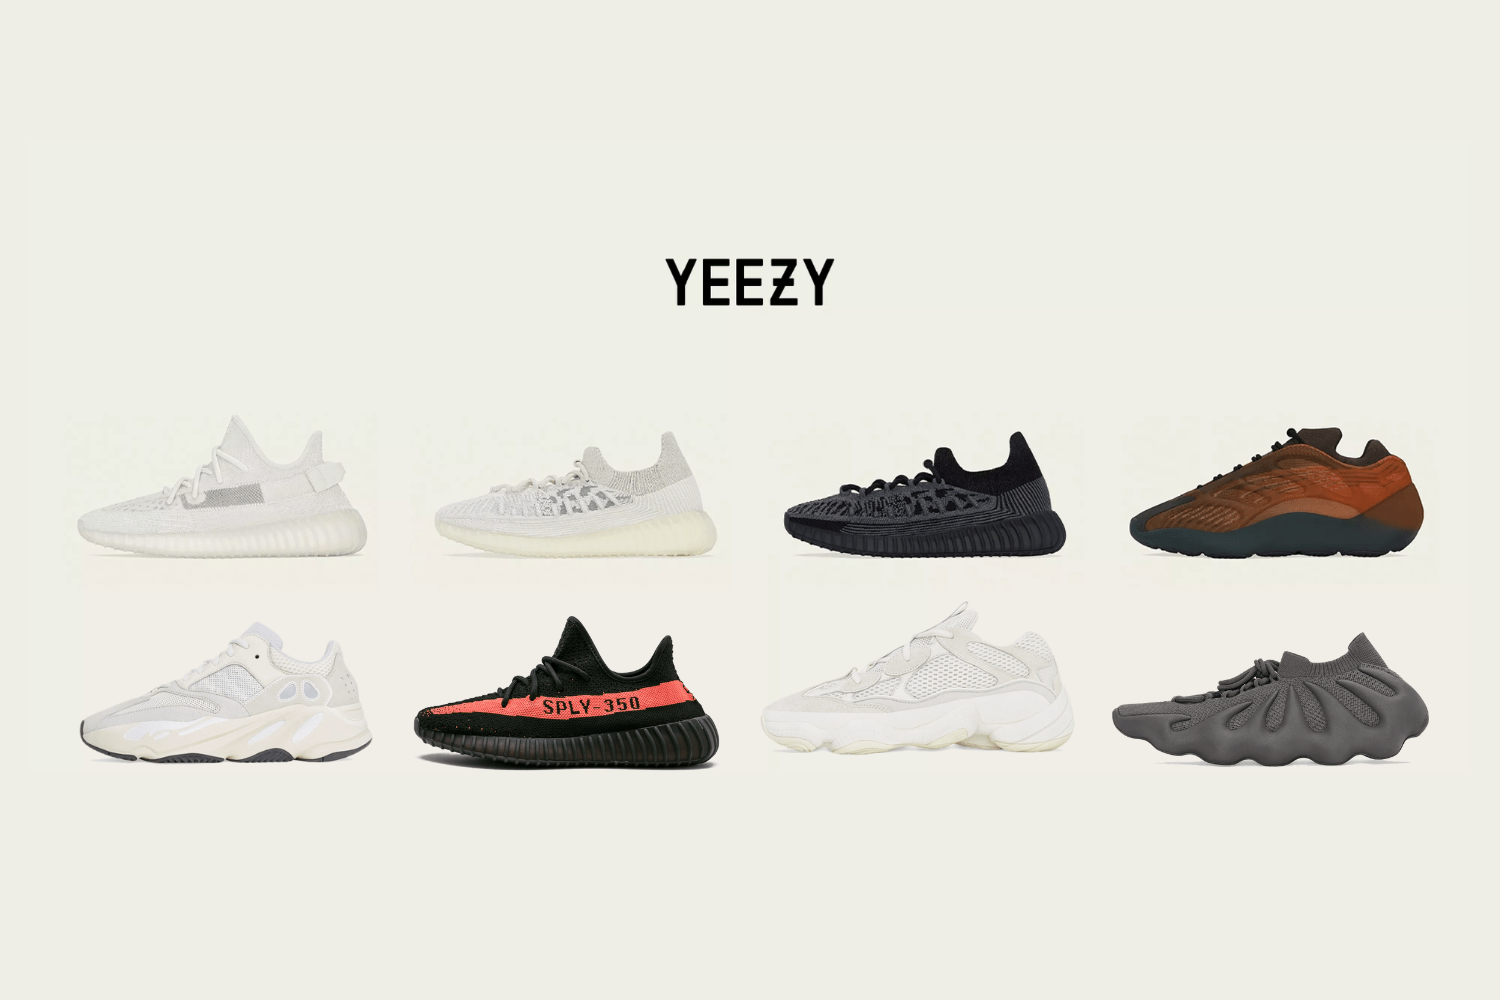 These YEEZY models are now available at Footdistrict